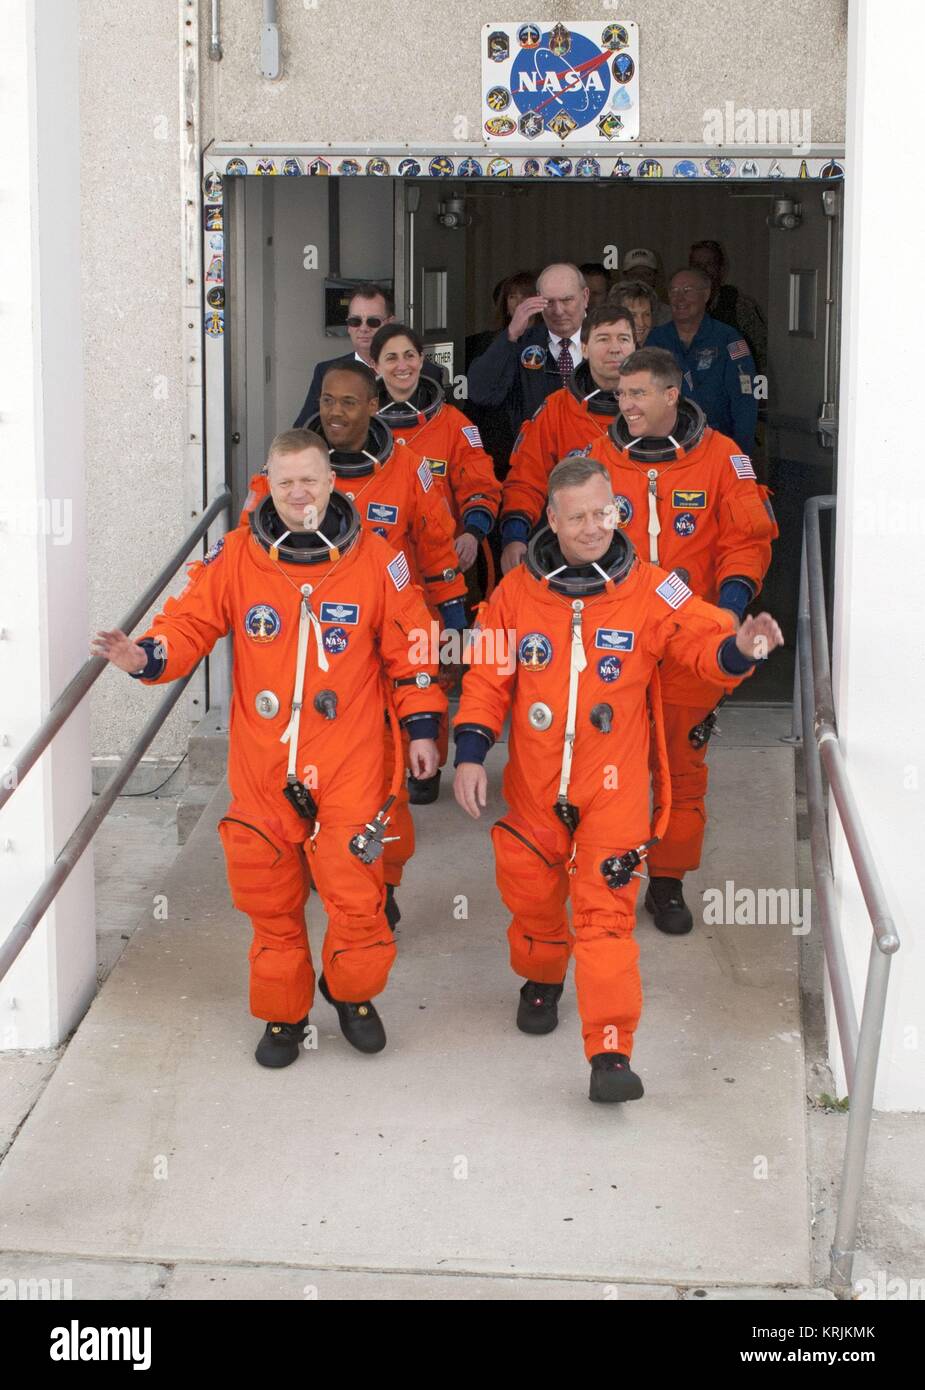 NASA International Space Station Space Shuttle Discovery STS-133 mission prime crew astronauts (left, front to back) Eric Boe, Alvin Drew, Nicole Stott, (right, front to back) Steve Lindsey, Steve Bowman, and Michael Barratt leave the Kennedy Space Center Operations and Checkout Building in preparation for launch February 24, 2011 in Merritt Island, Florida. Stock Photo